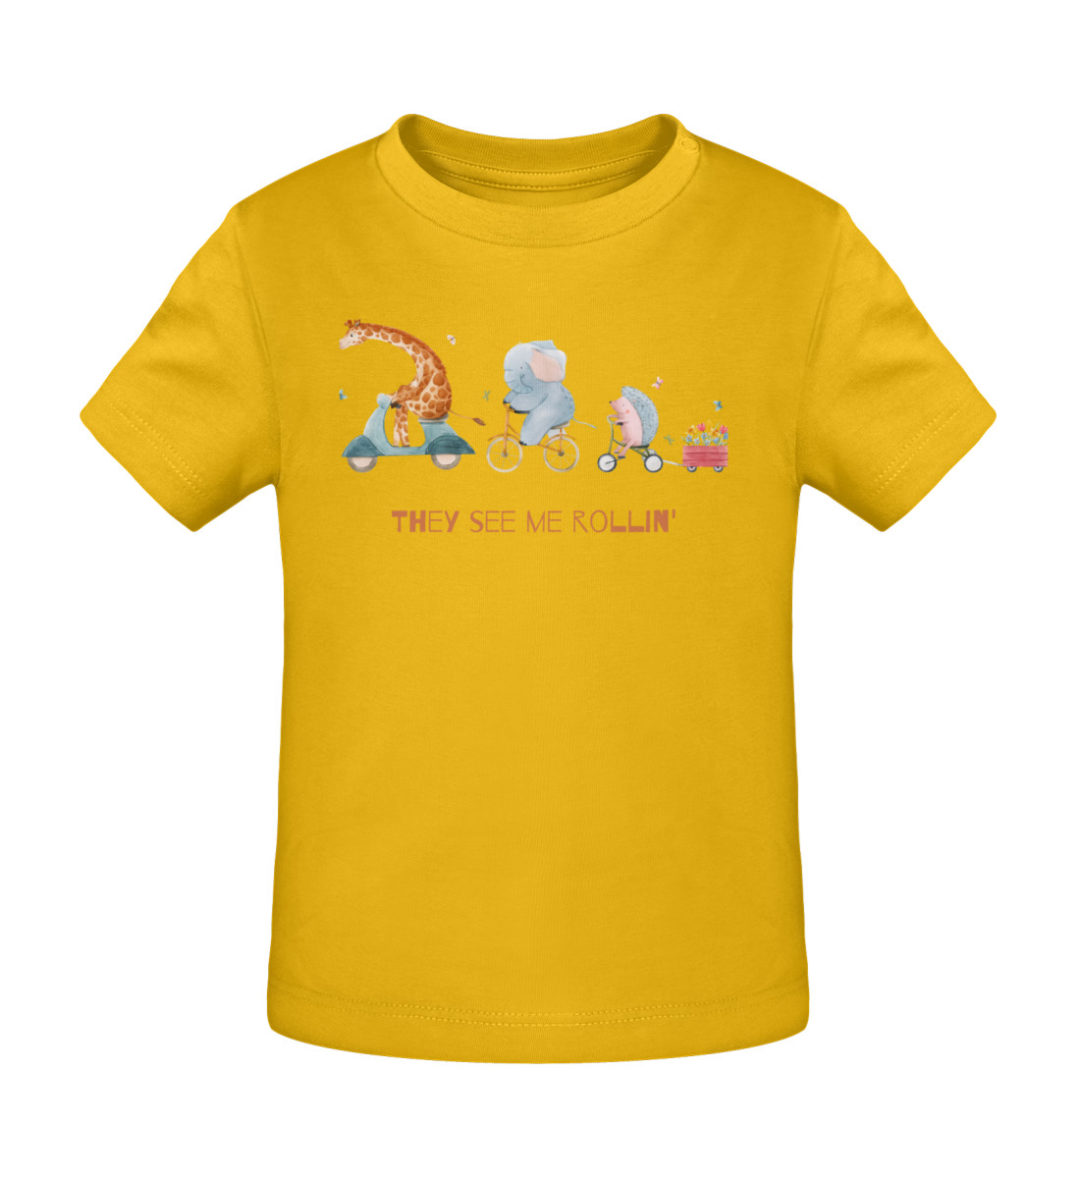 They see me rollin- - Baby Creator T-Shirt ST/ST-6885